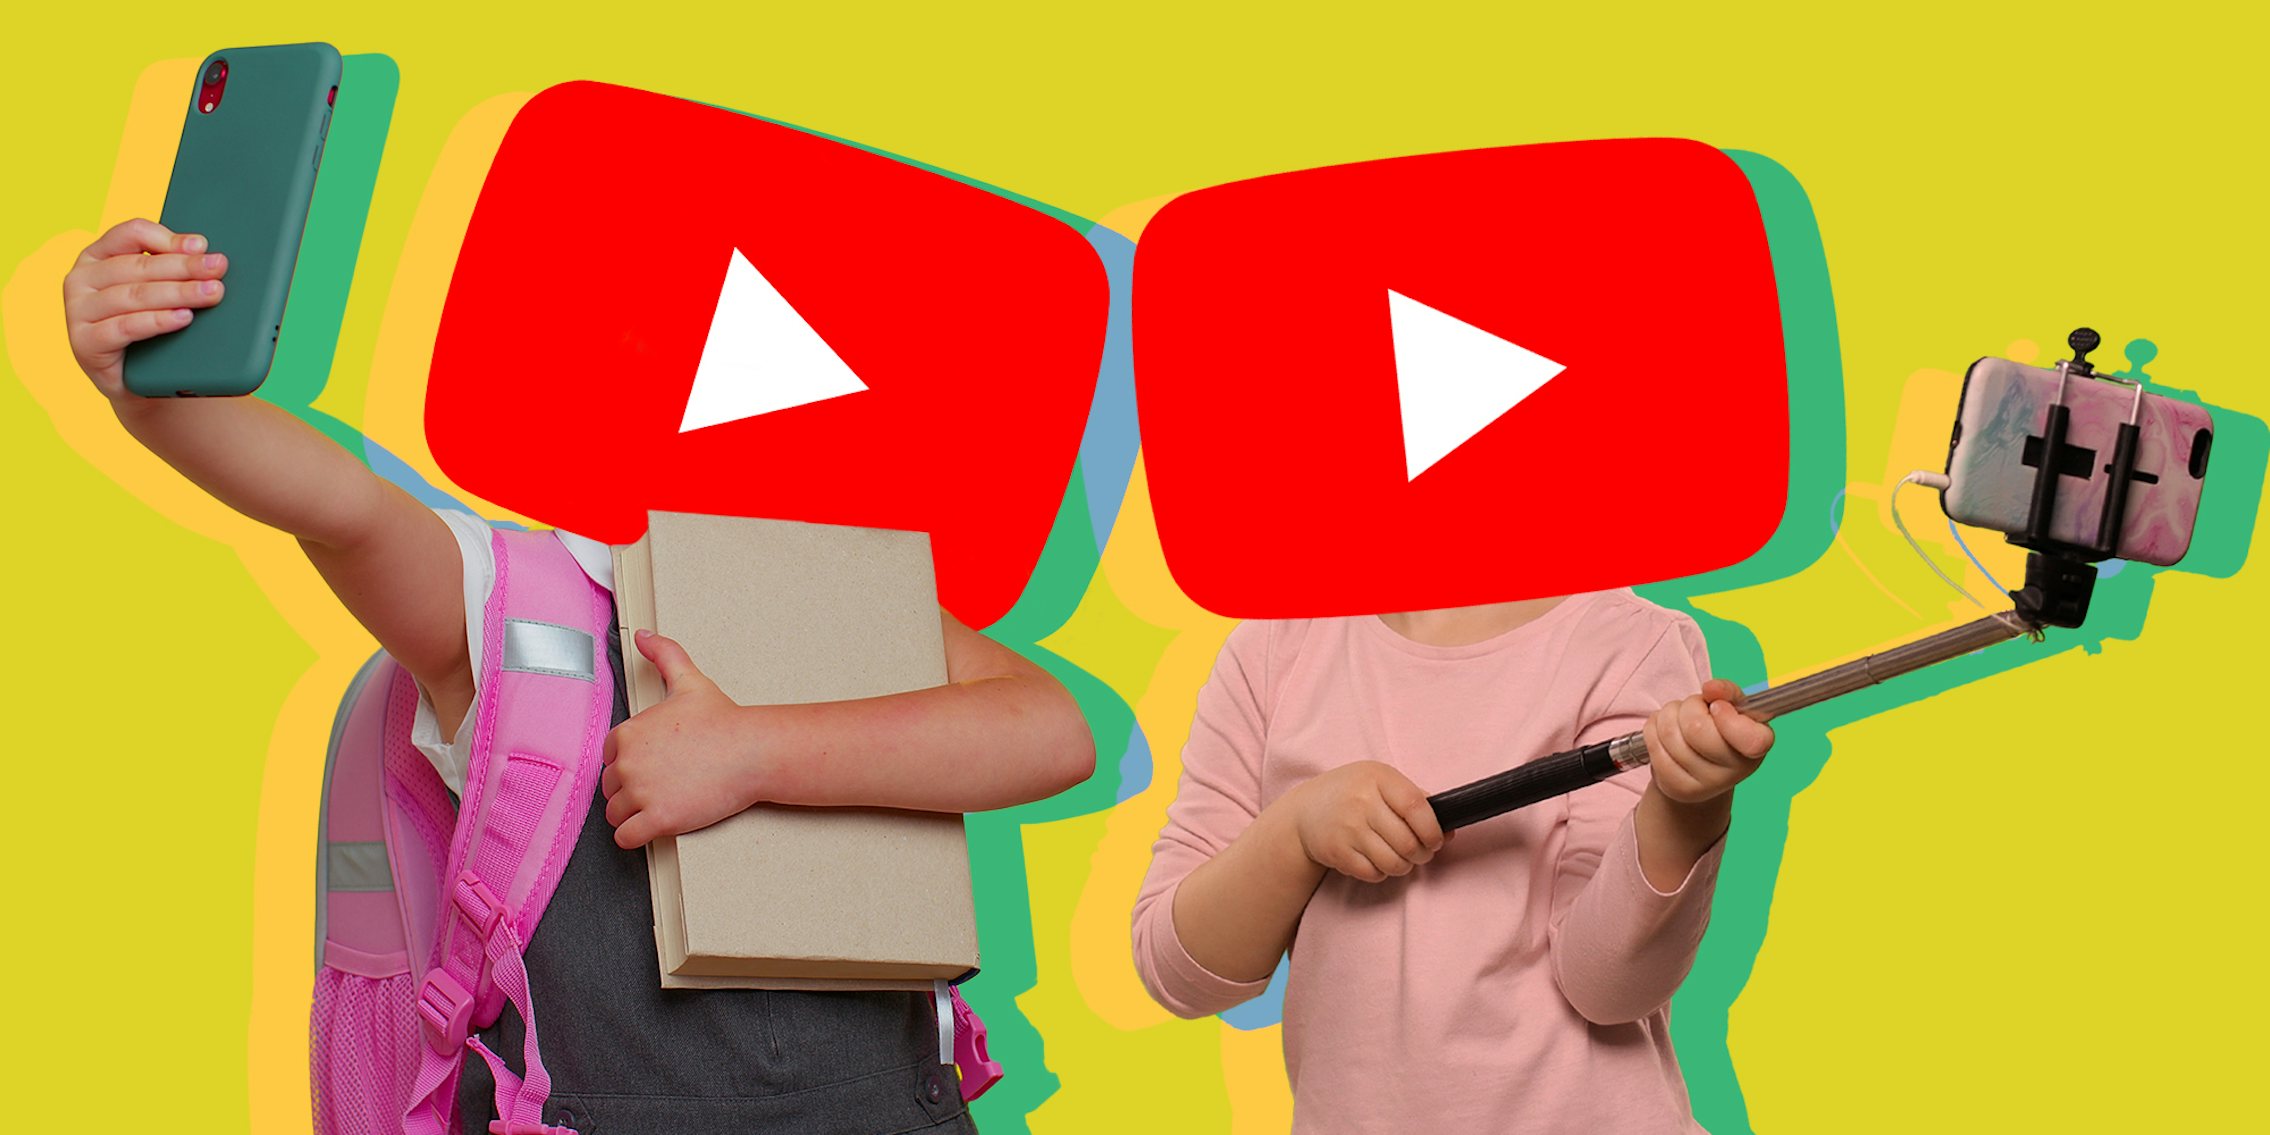 young children holding phones to film themselves with YouTube logos for heads